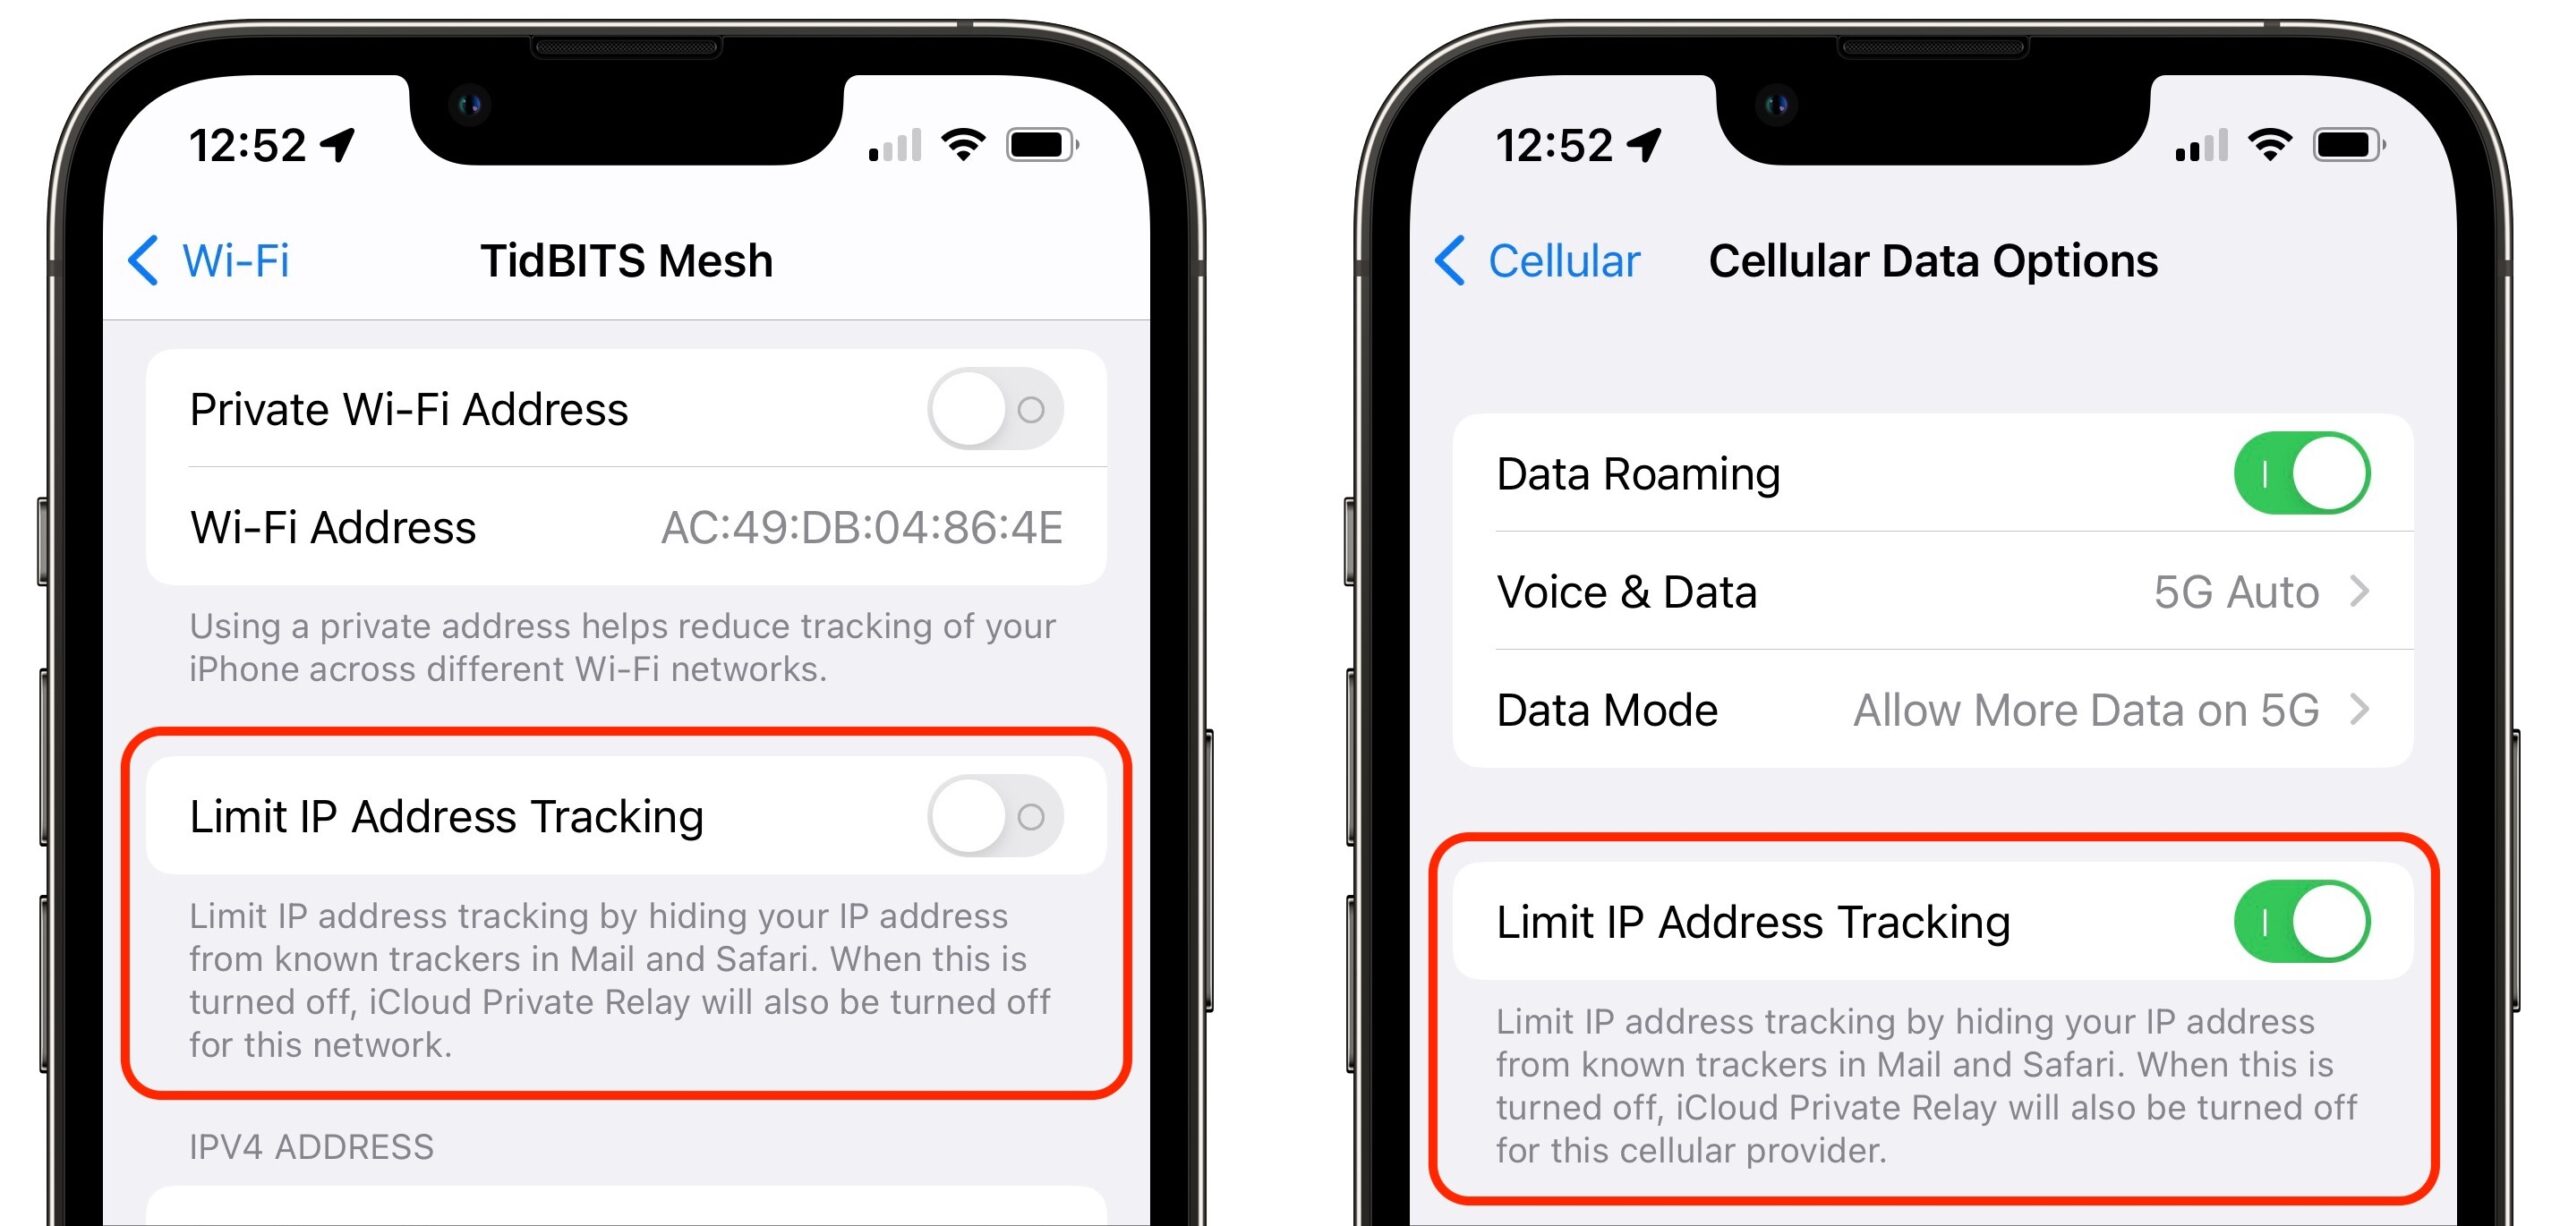 Global Connection: Enabling Roaming On IPhone 12